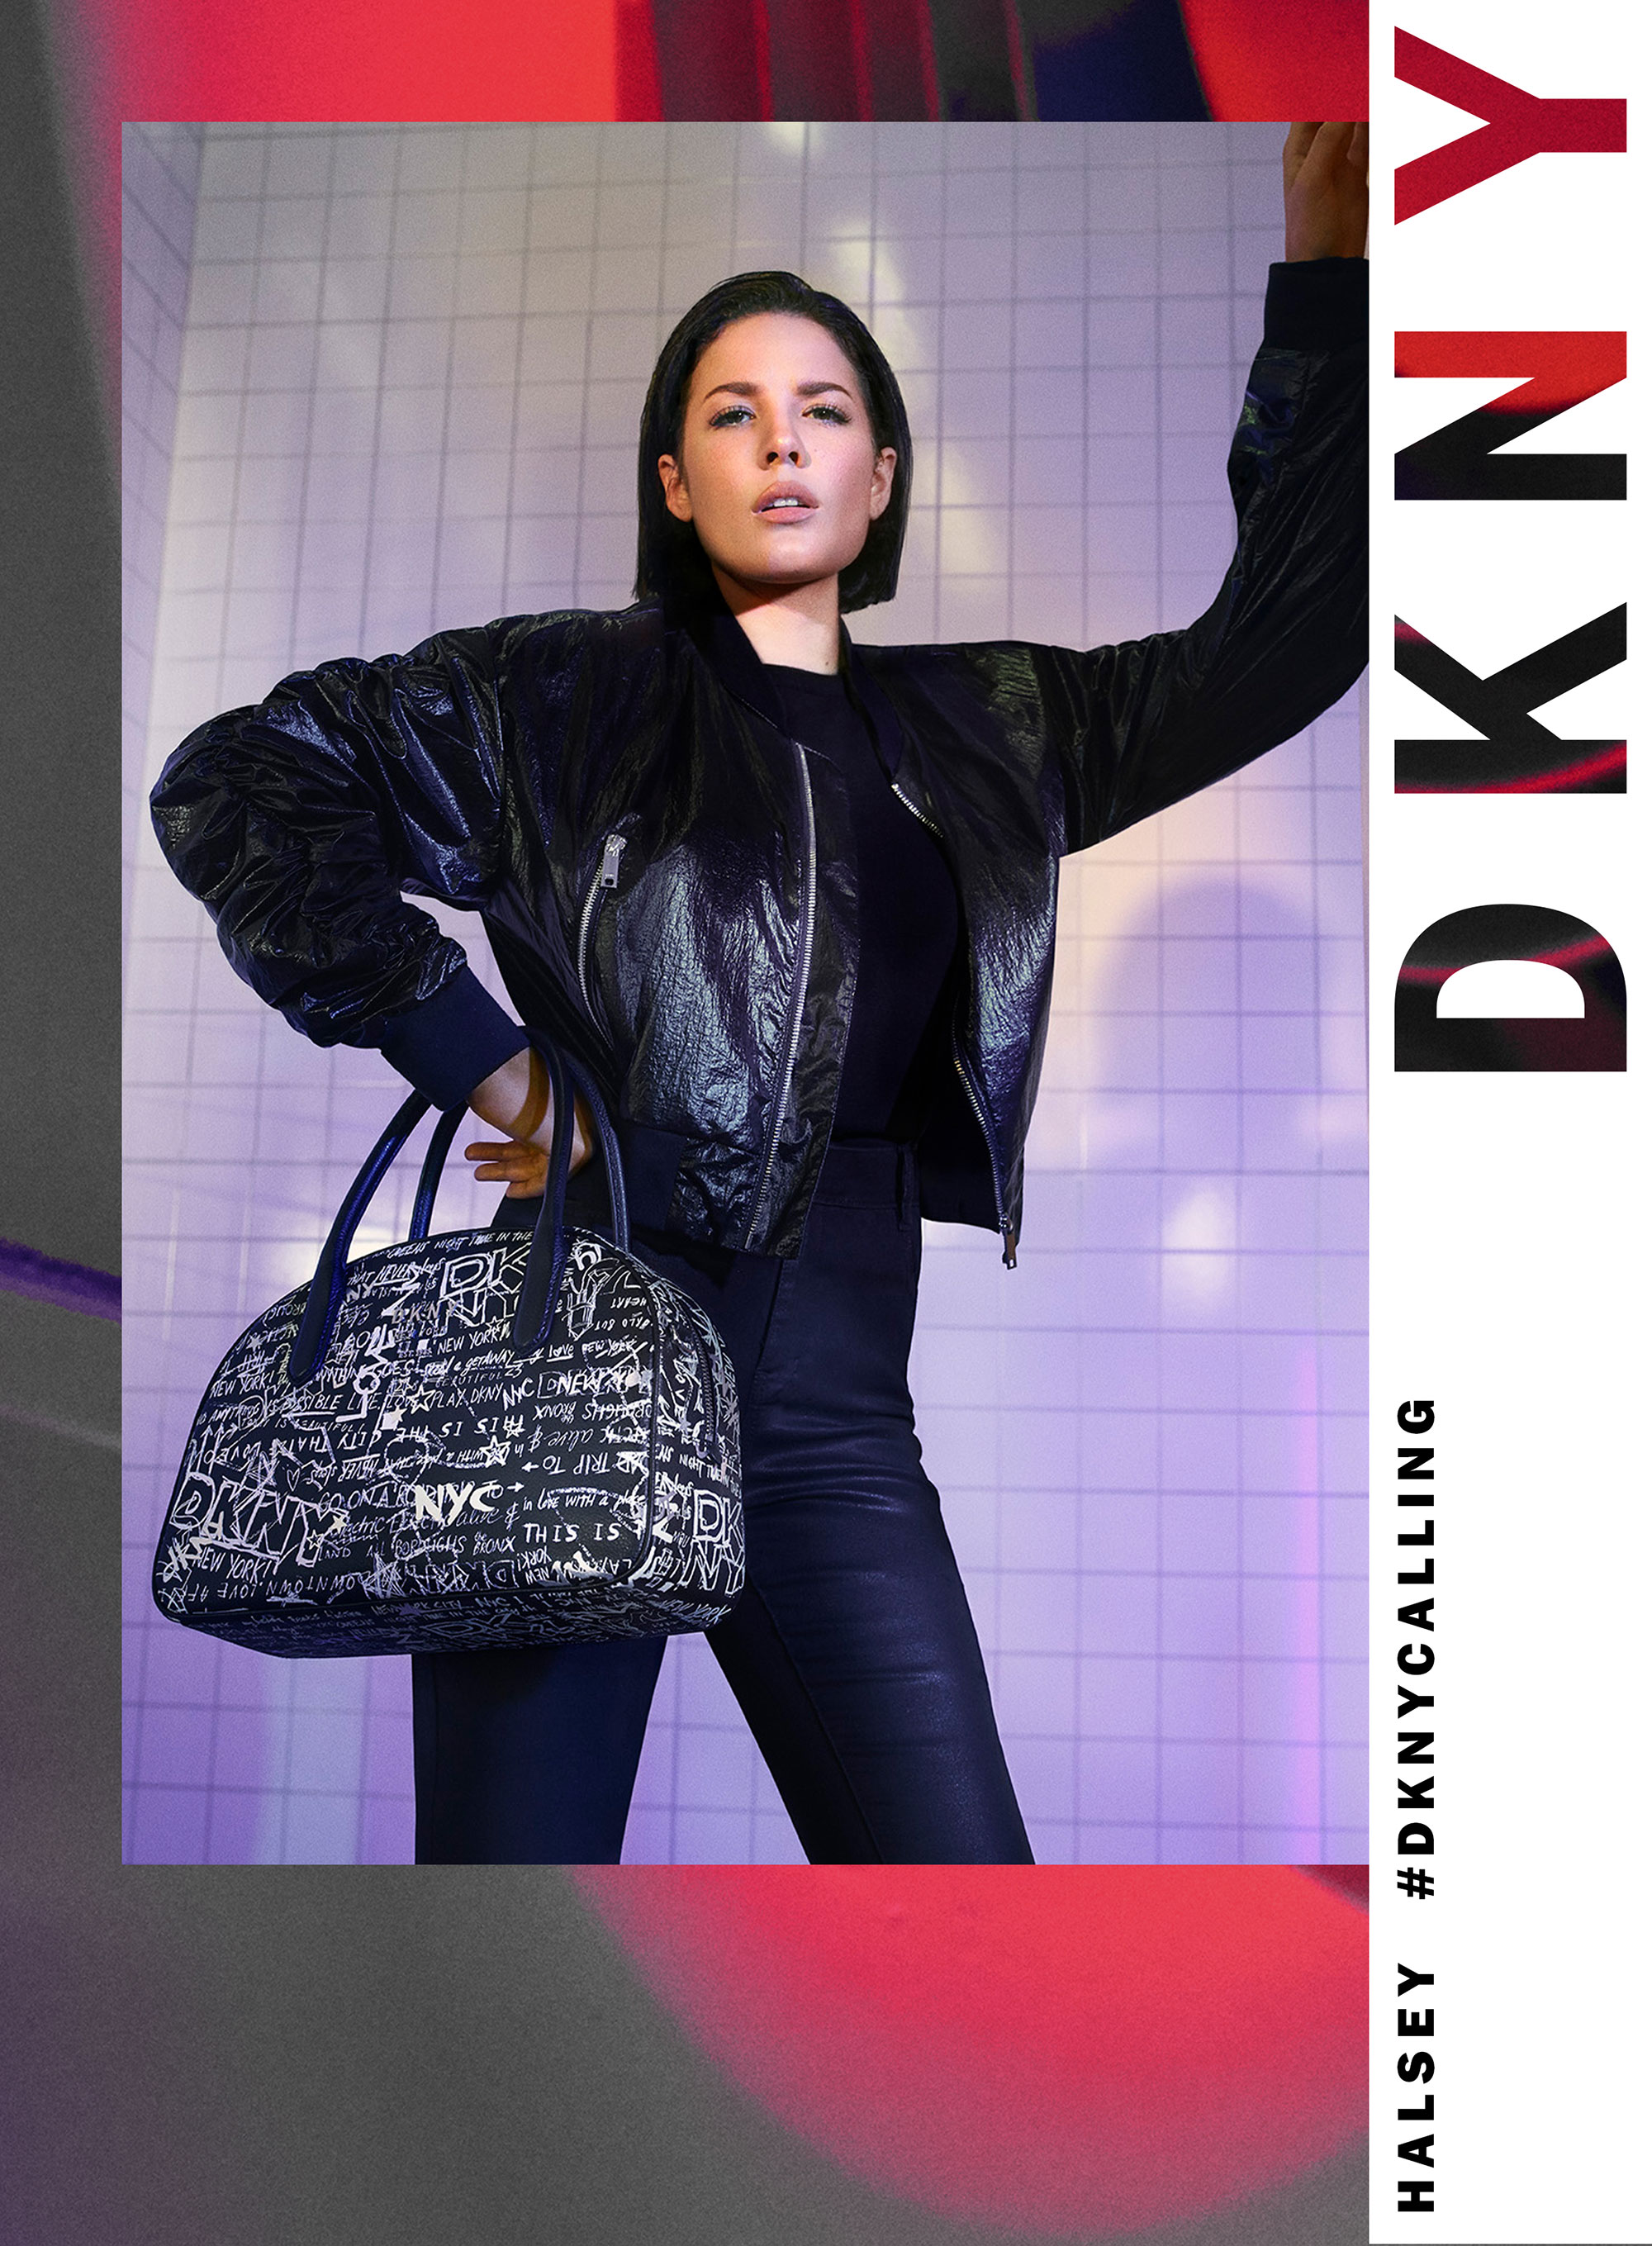 DKNY presents the current collection of bags